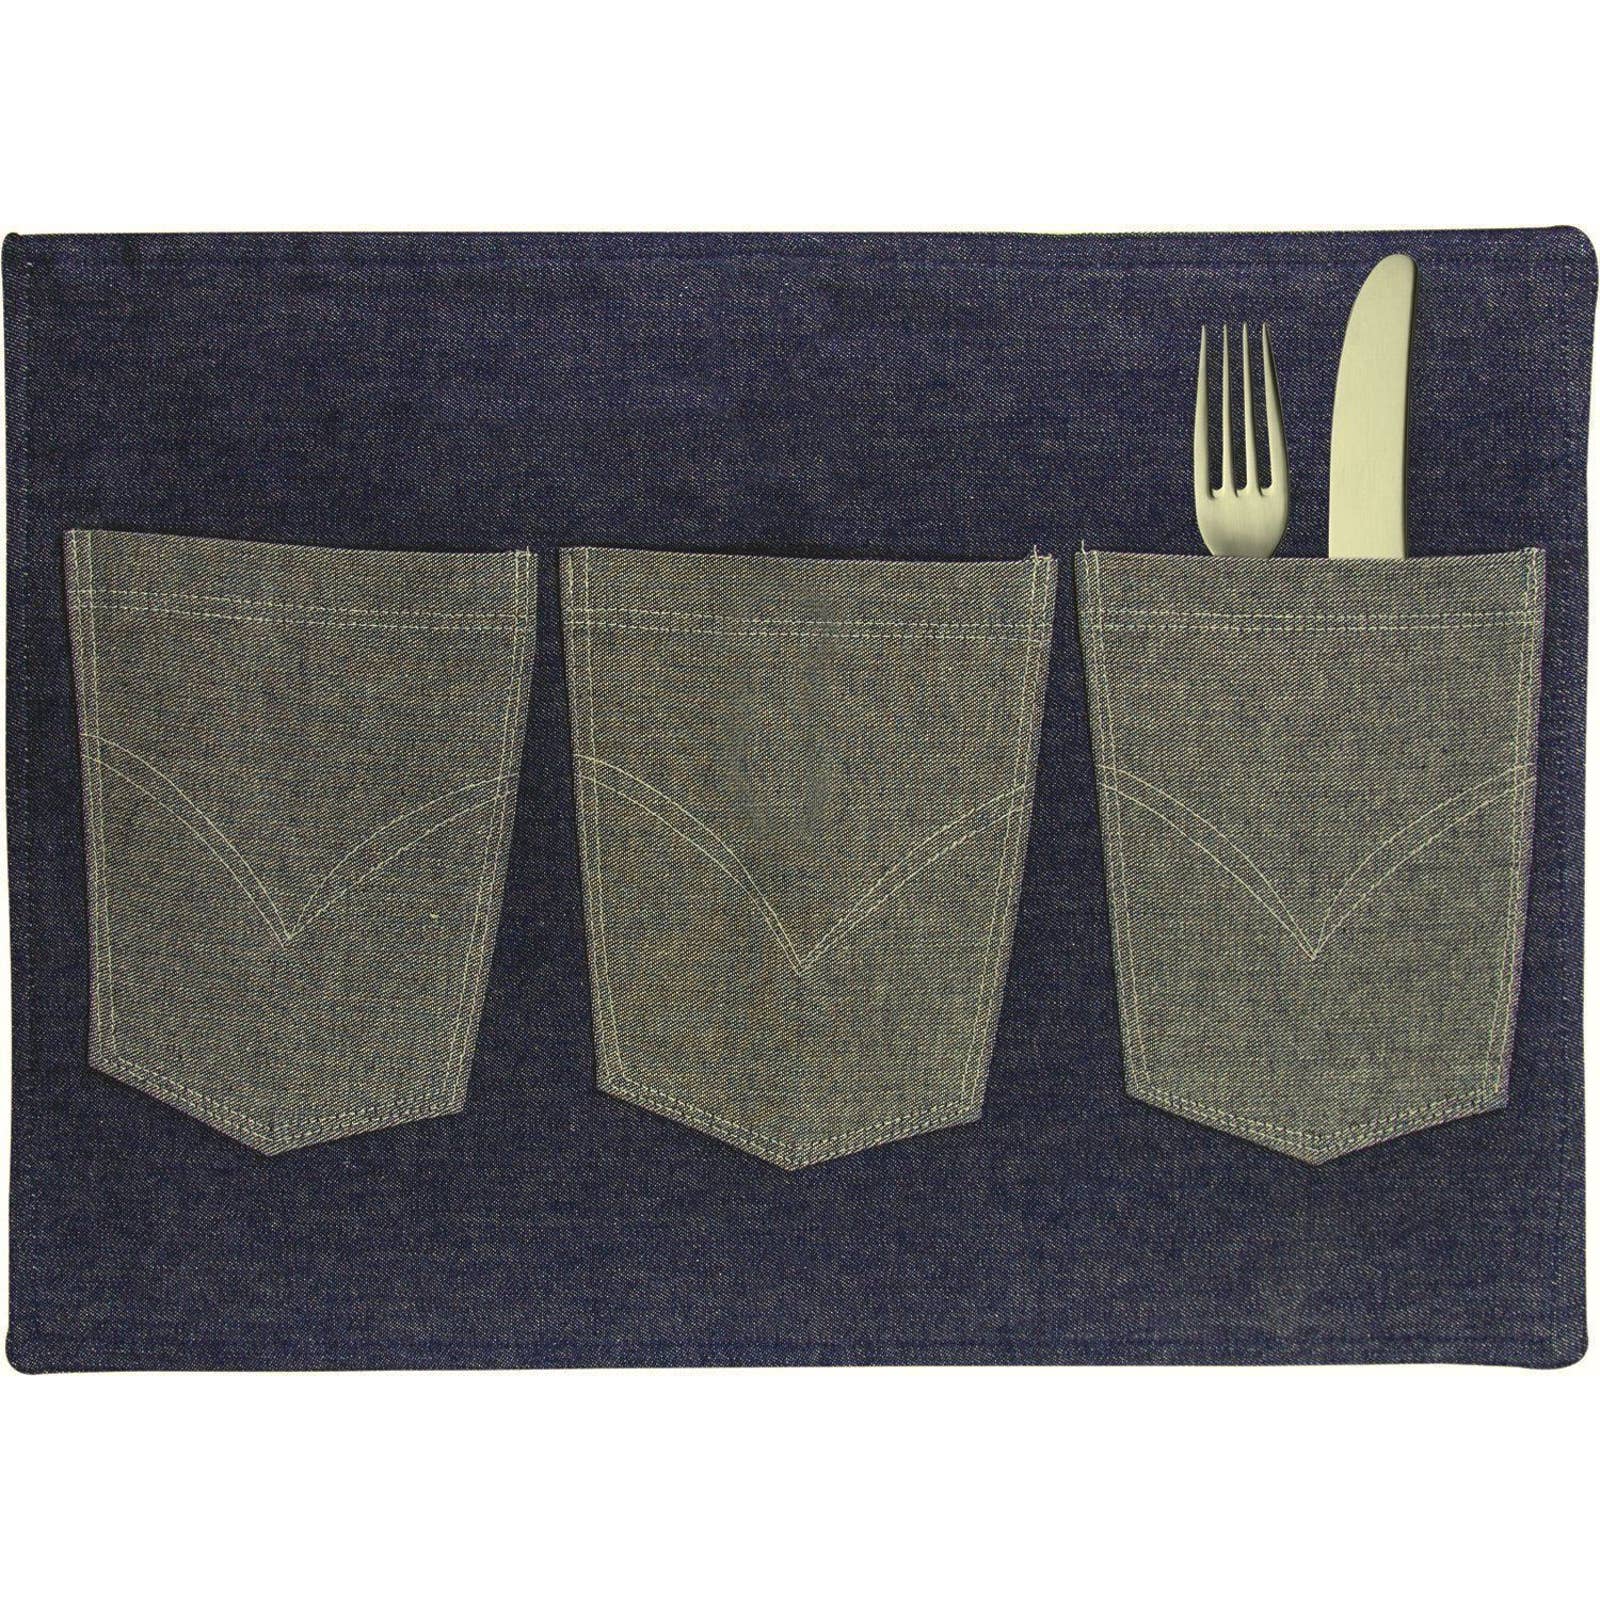 Set of 4 Blue Jean Denim Placemat with 3 Utensil Pockets Navy Cotton 18X13" NEW